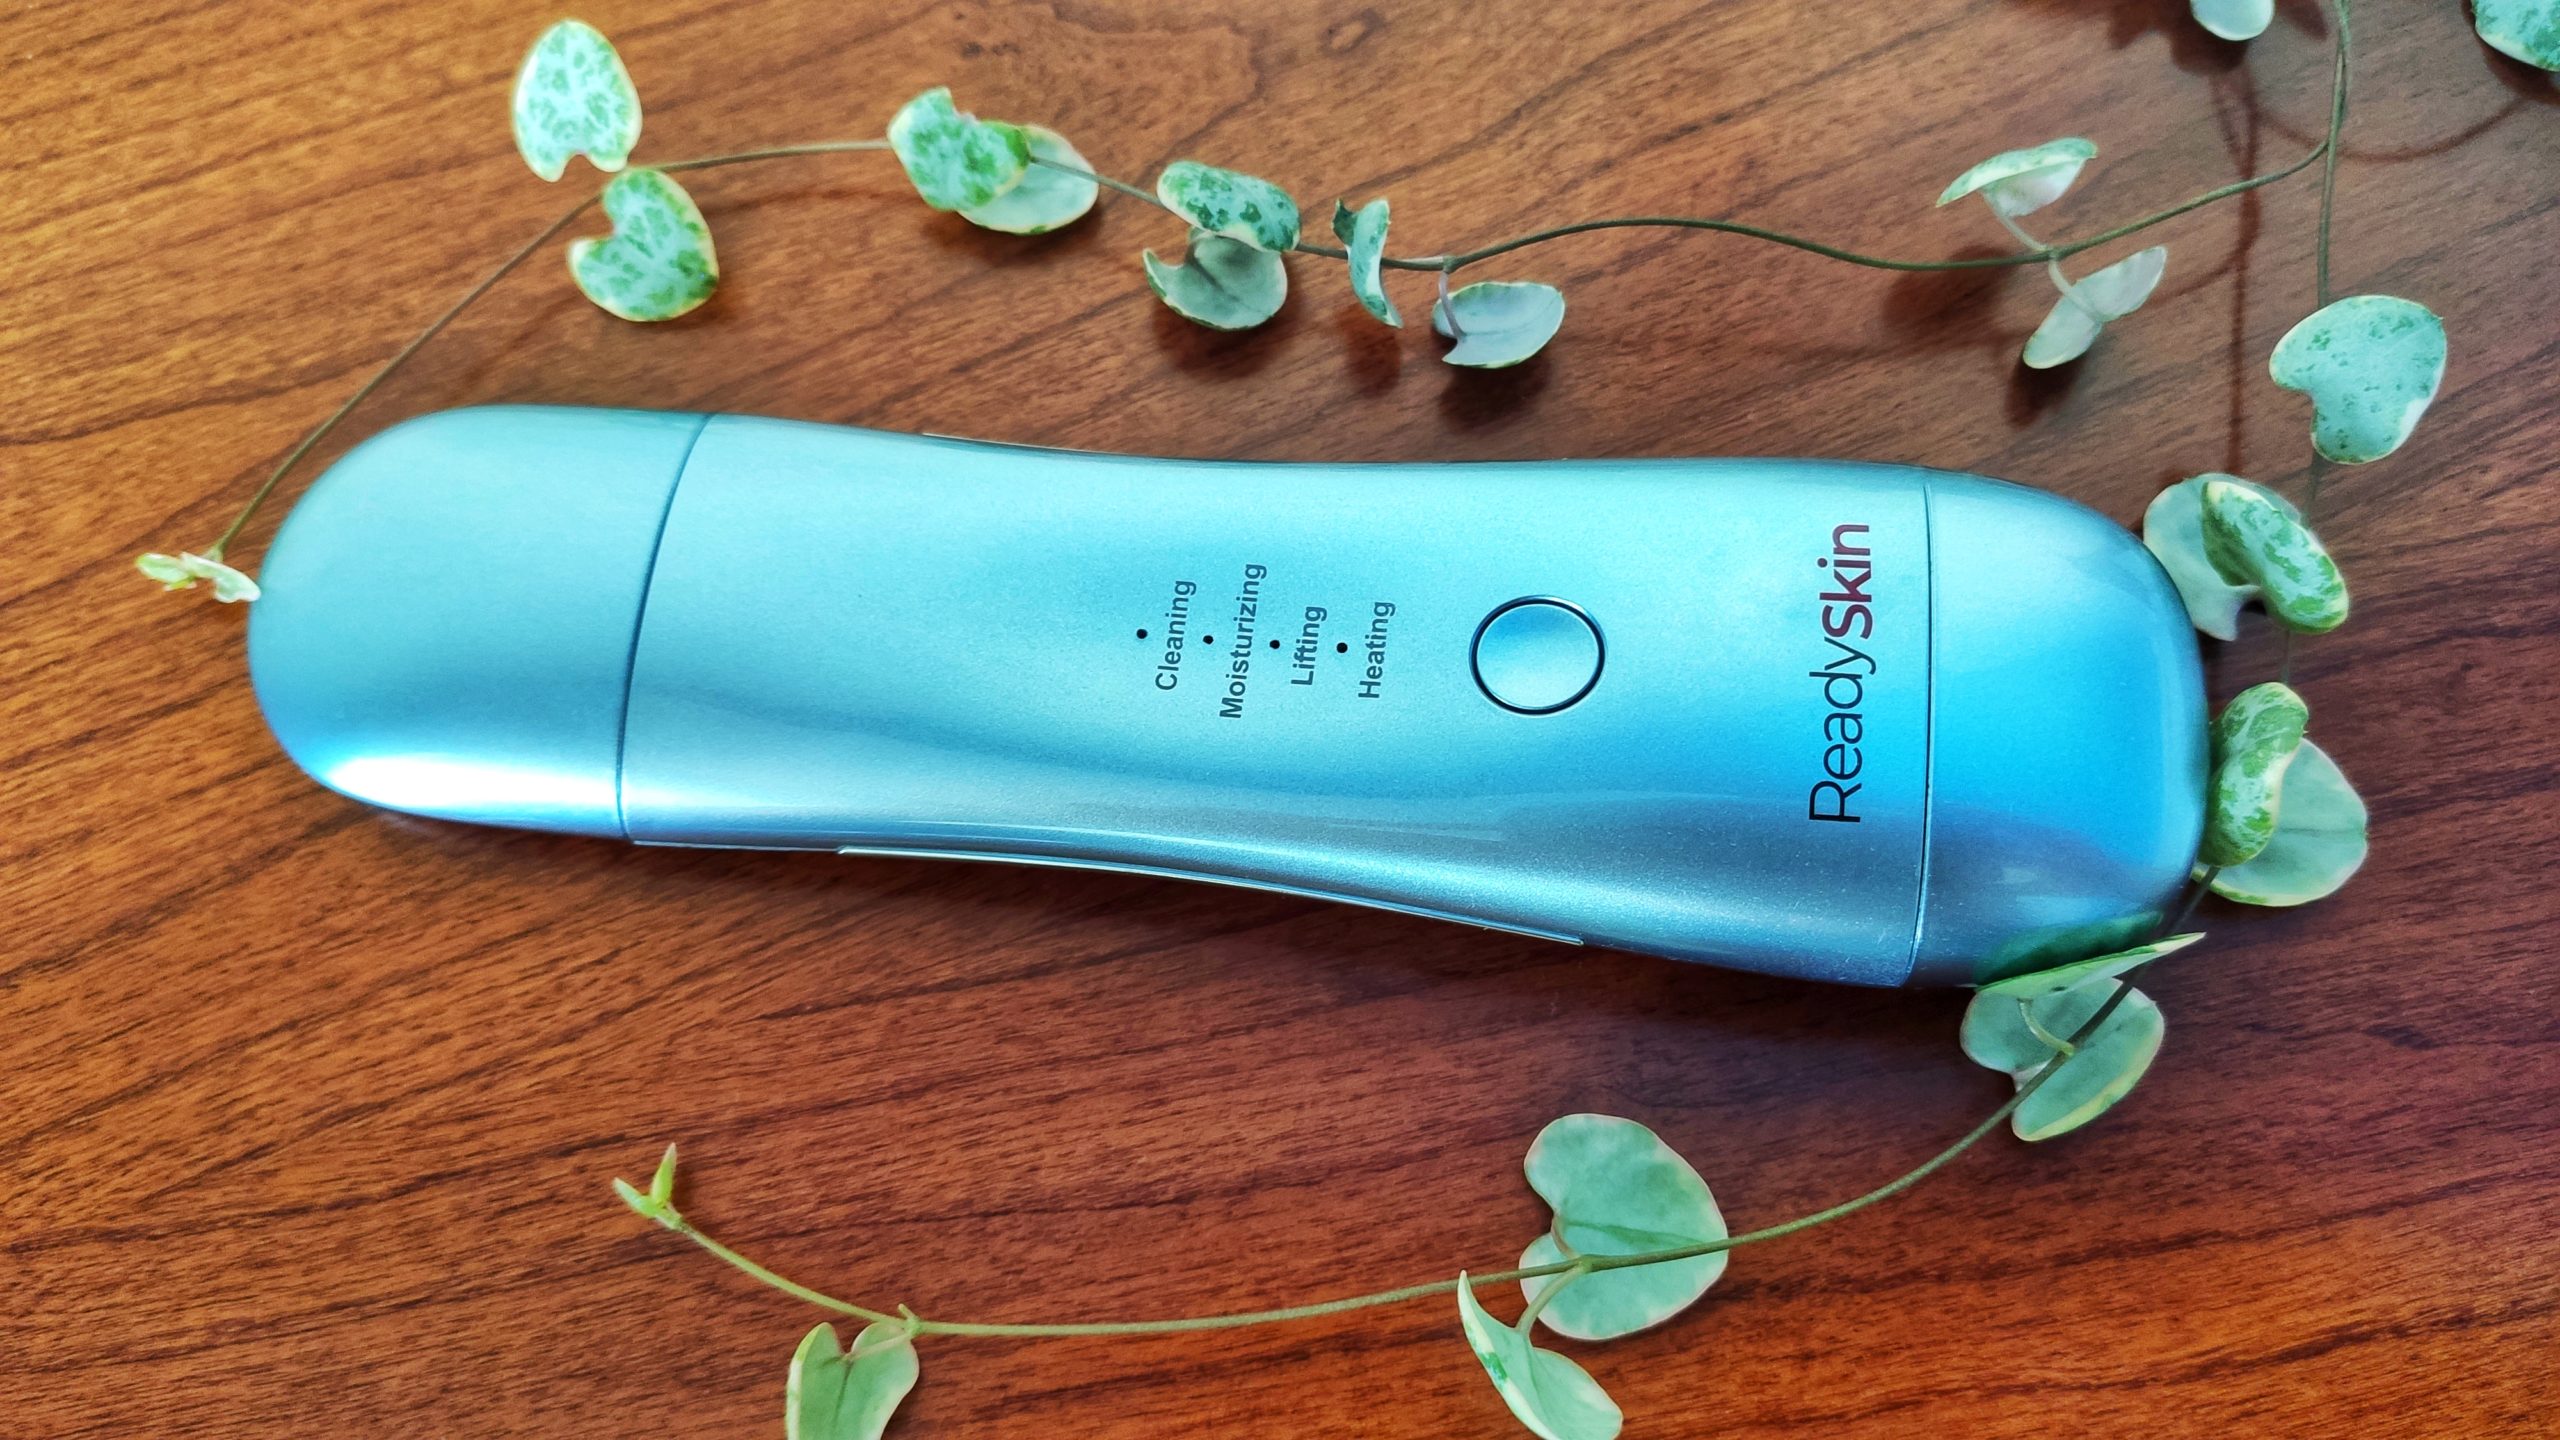 Save time and money on a beautician! A detailed review of the ReadySkin ZY8300 ultrasonic facial cleanser